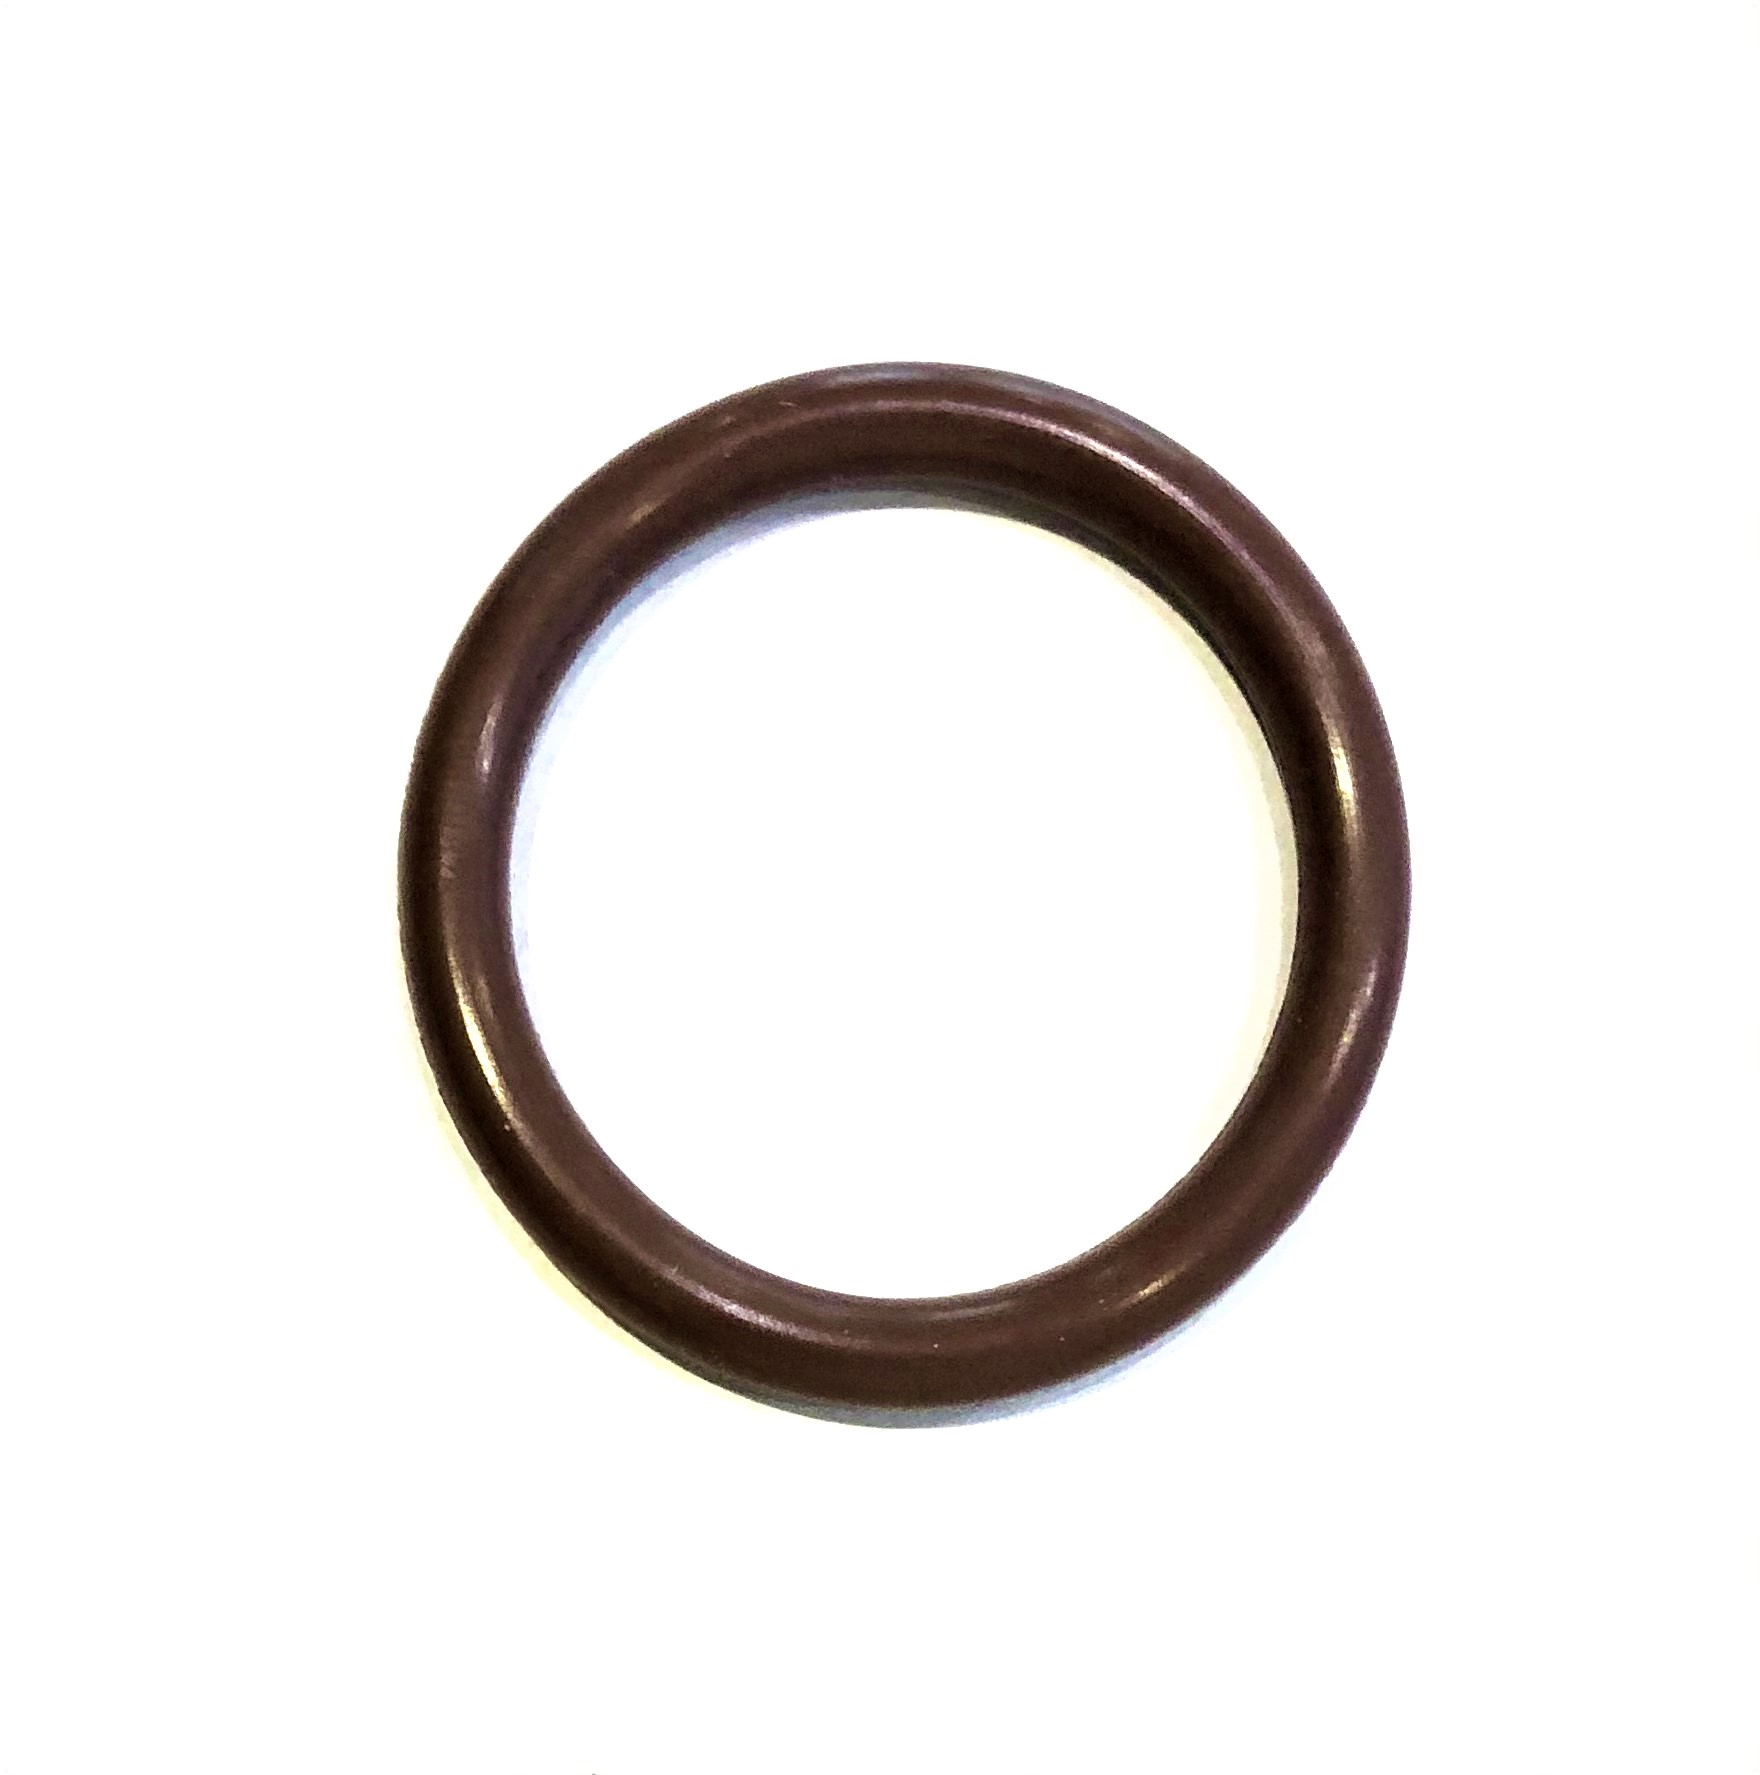 REPLACEMENT GASKET "LARGE" FOR P/N: 00641USA